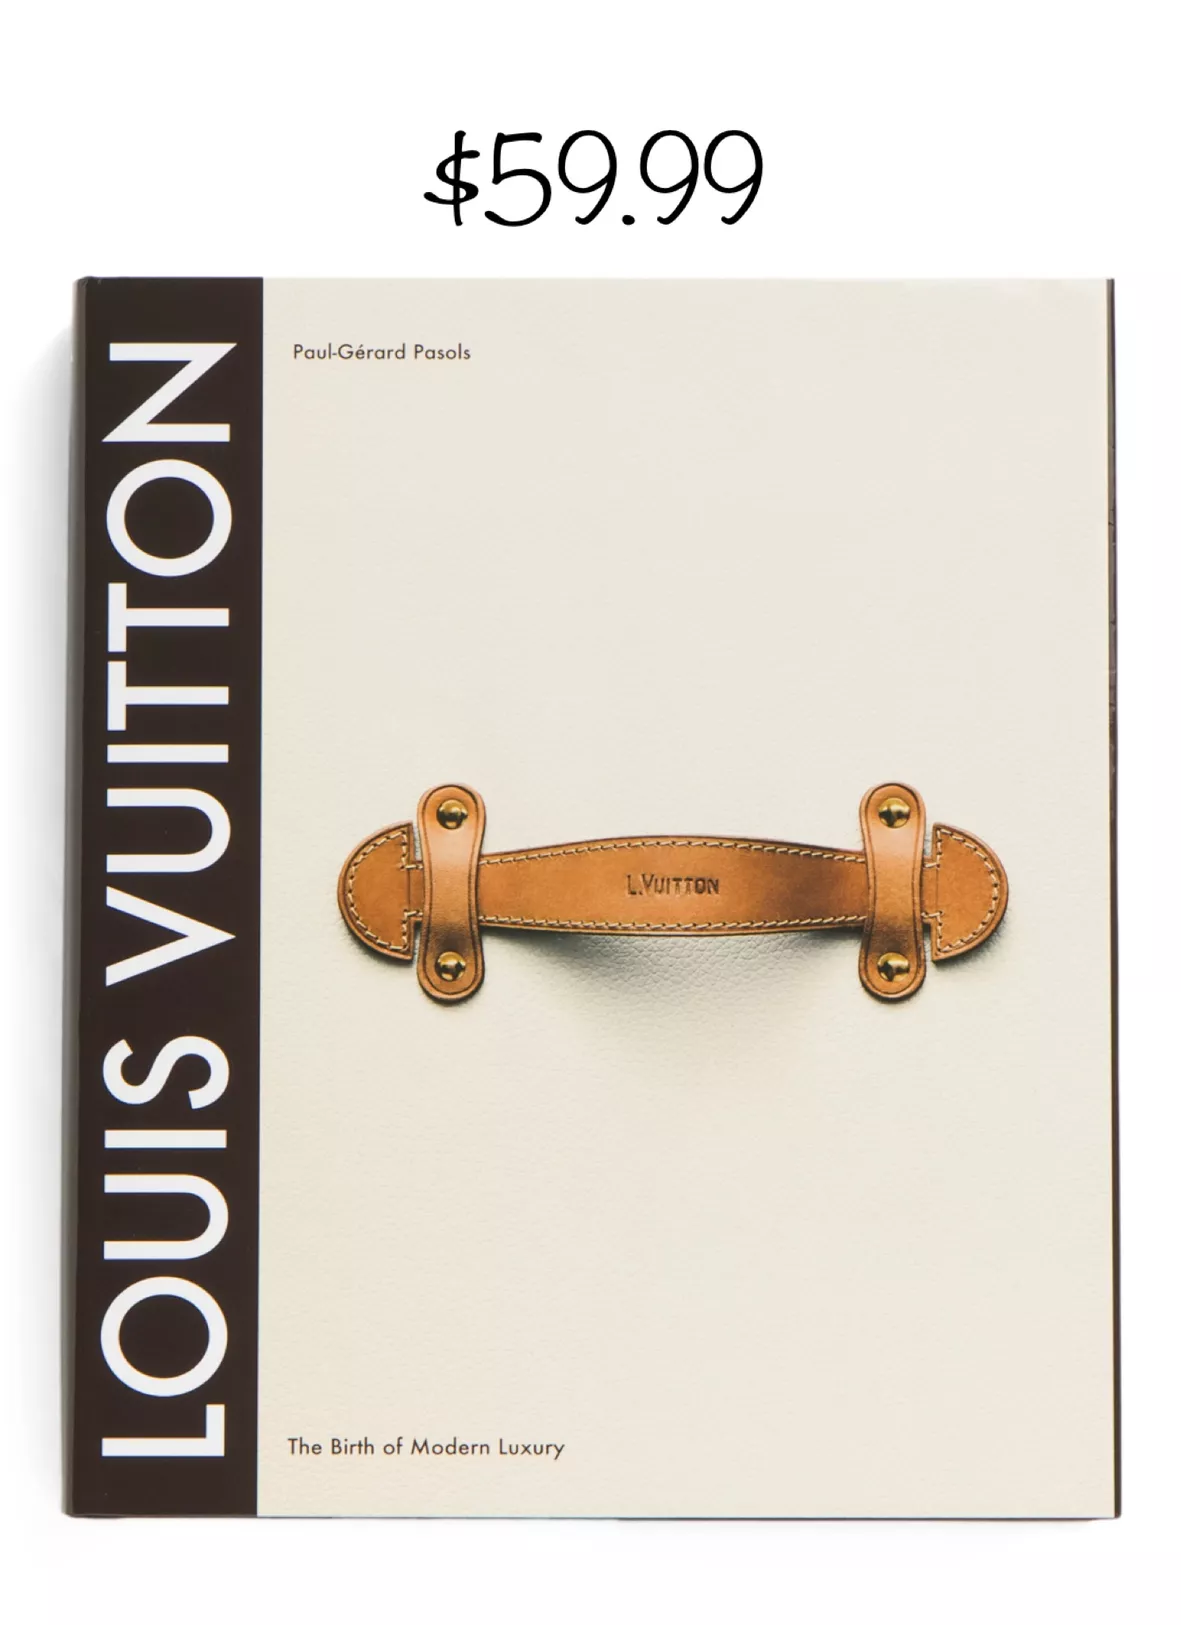 Louis Vuitton: The Birth of Modern Luxury, Coffee Table Book